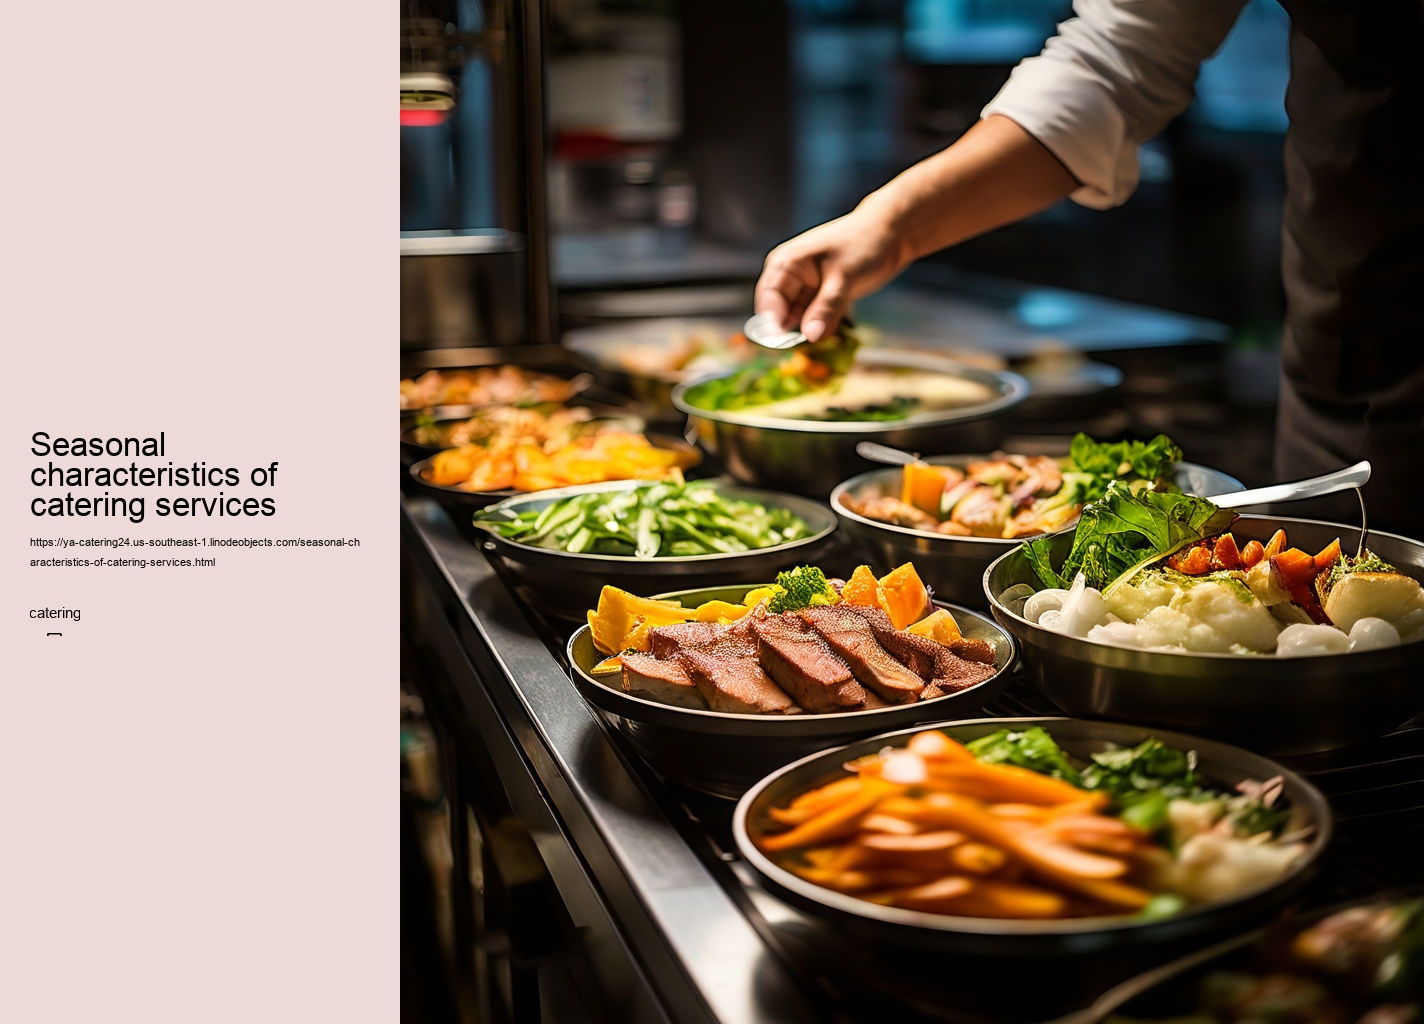 Seasonal characteristics of catering services